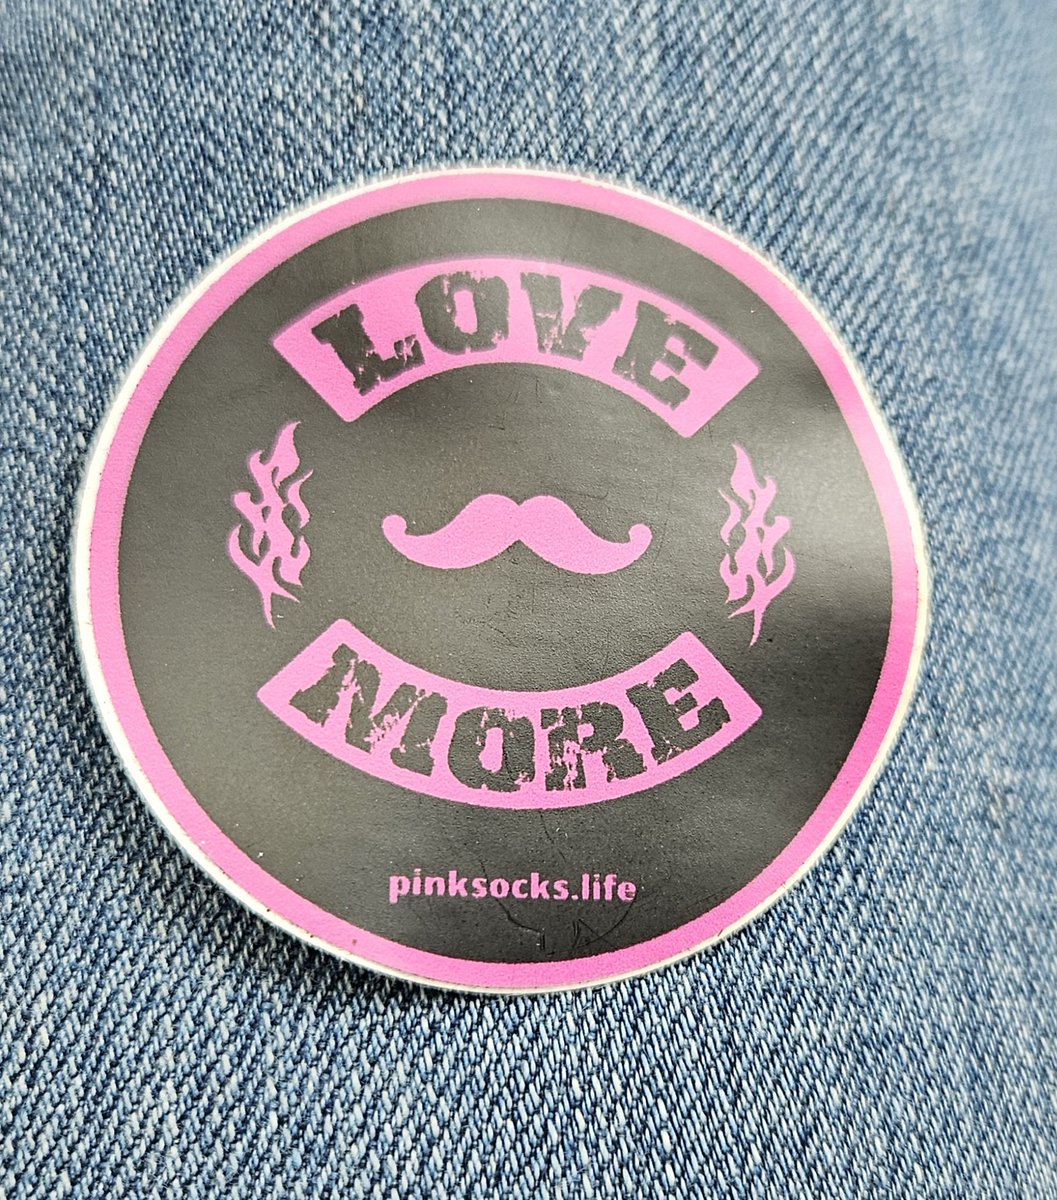 Thank you Everyone who voted for me, shared and learned about #pinksocks in my quest for America's Best Teacher. My goal was to share the word and reach further. We did that! Welcome new friends 💗🧩🌍 #KindnessAmbassadors #BeTheGoodSeeTheGood #ShareMoreJoy